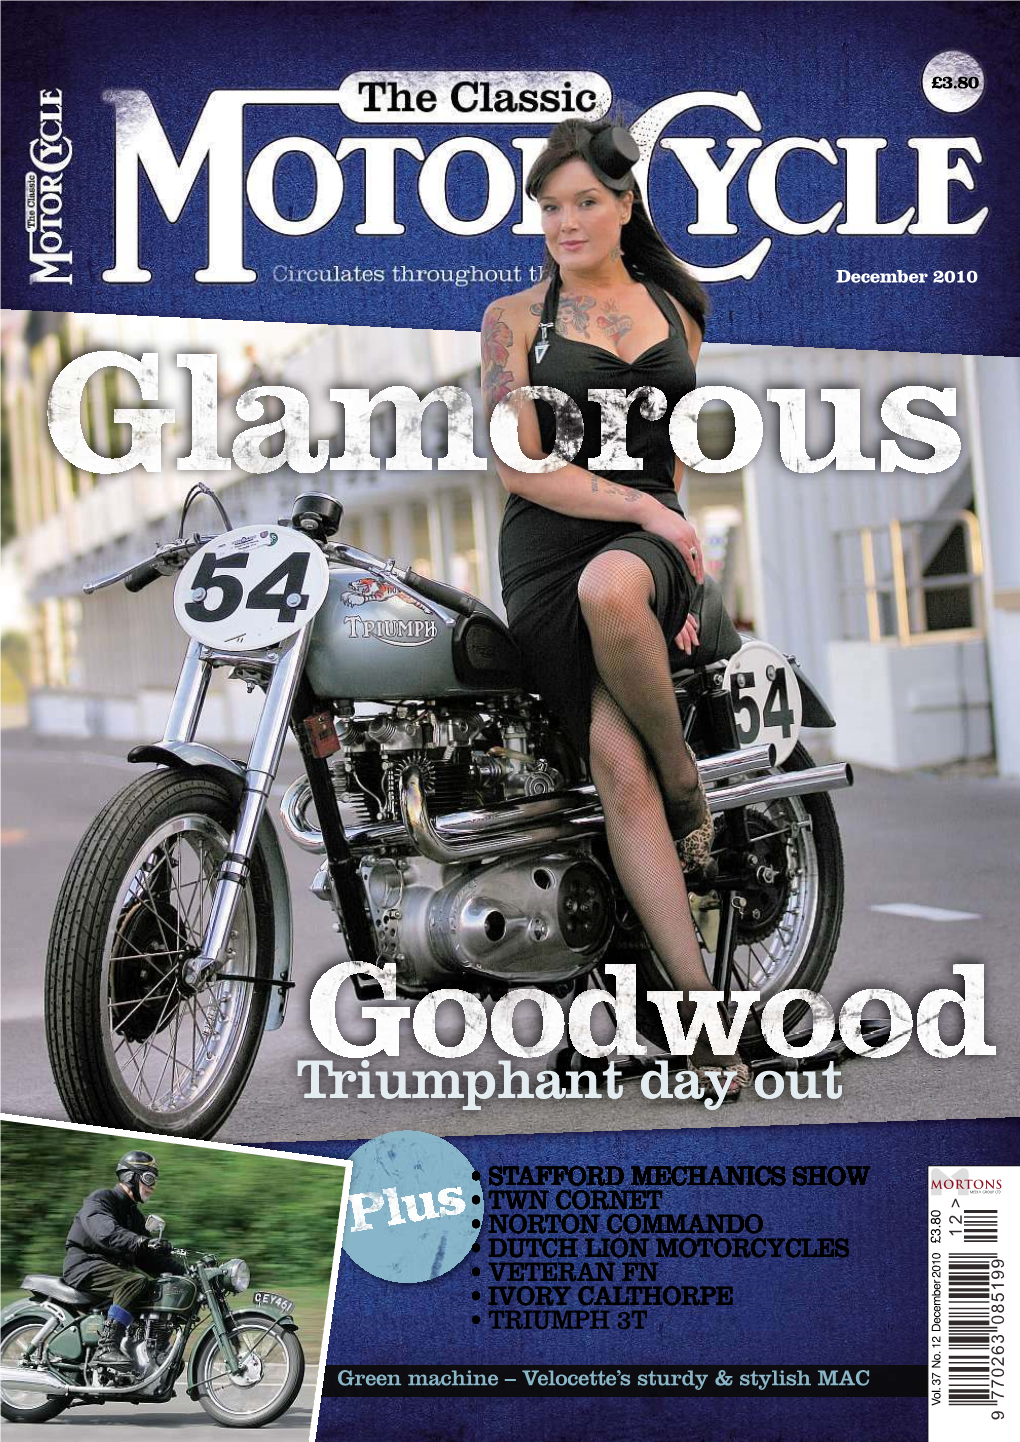 The Classic Motorcycle December 2010 Issue. Ace Get Front